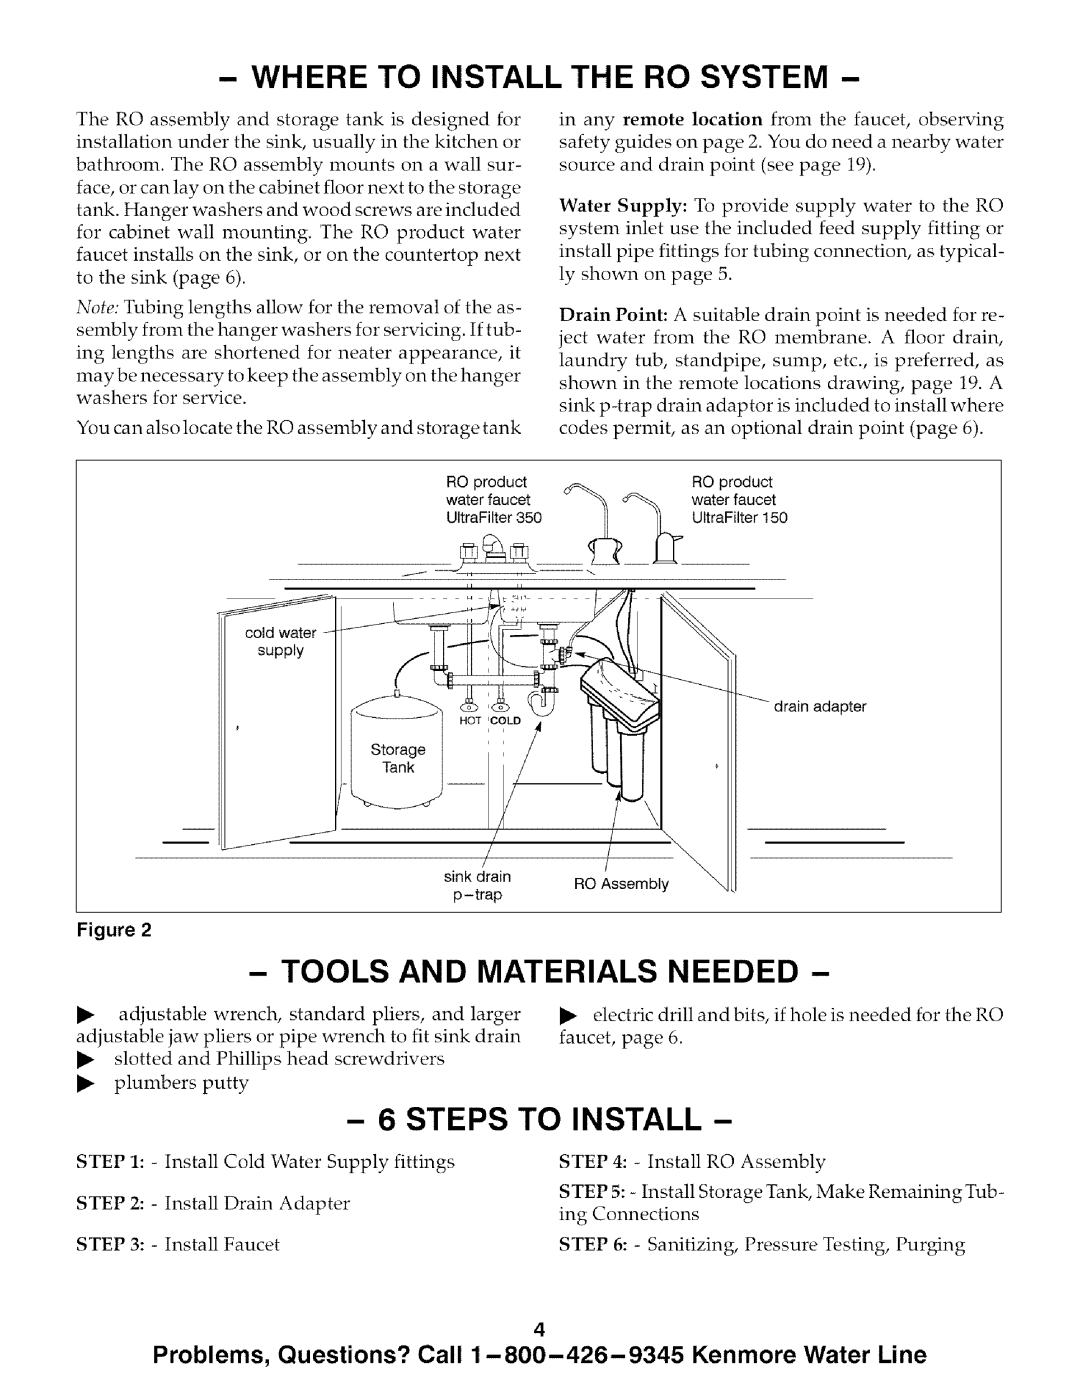 Kenmore 625.385700 Where To Install The Ro System, Tools And Materials Needed, Steps To Install, ing Connections 